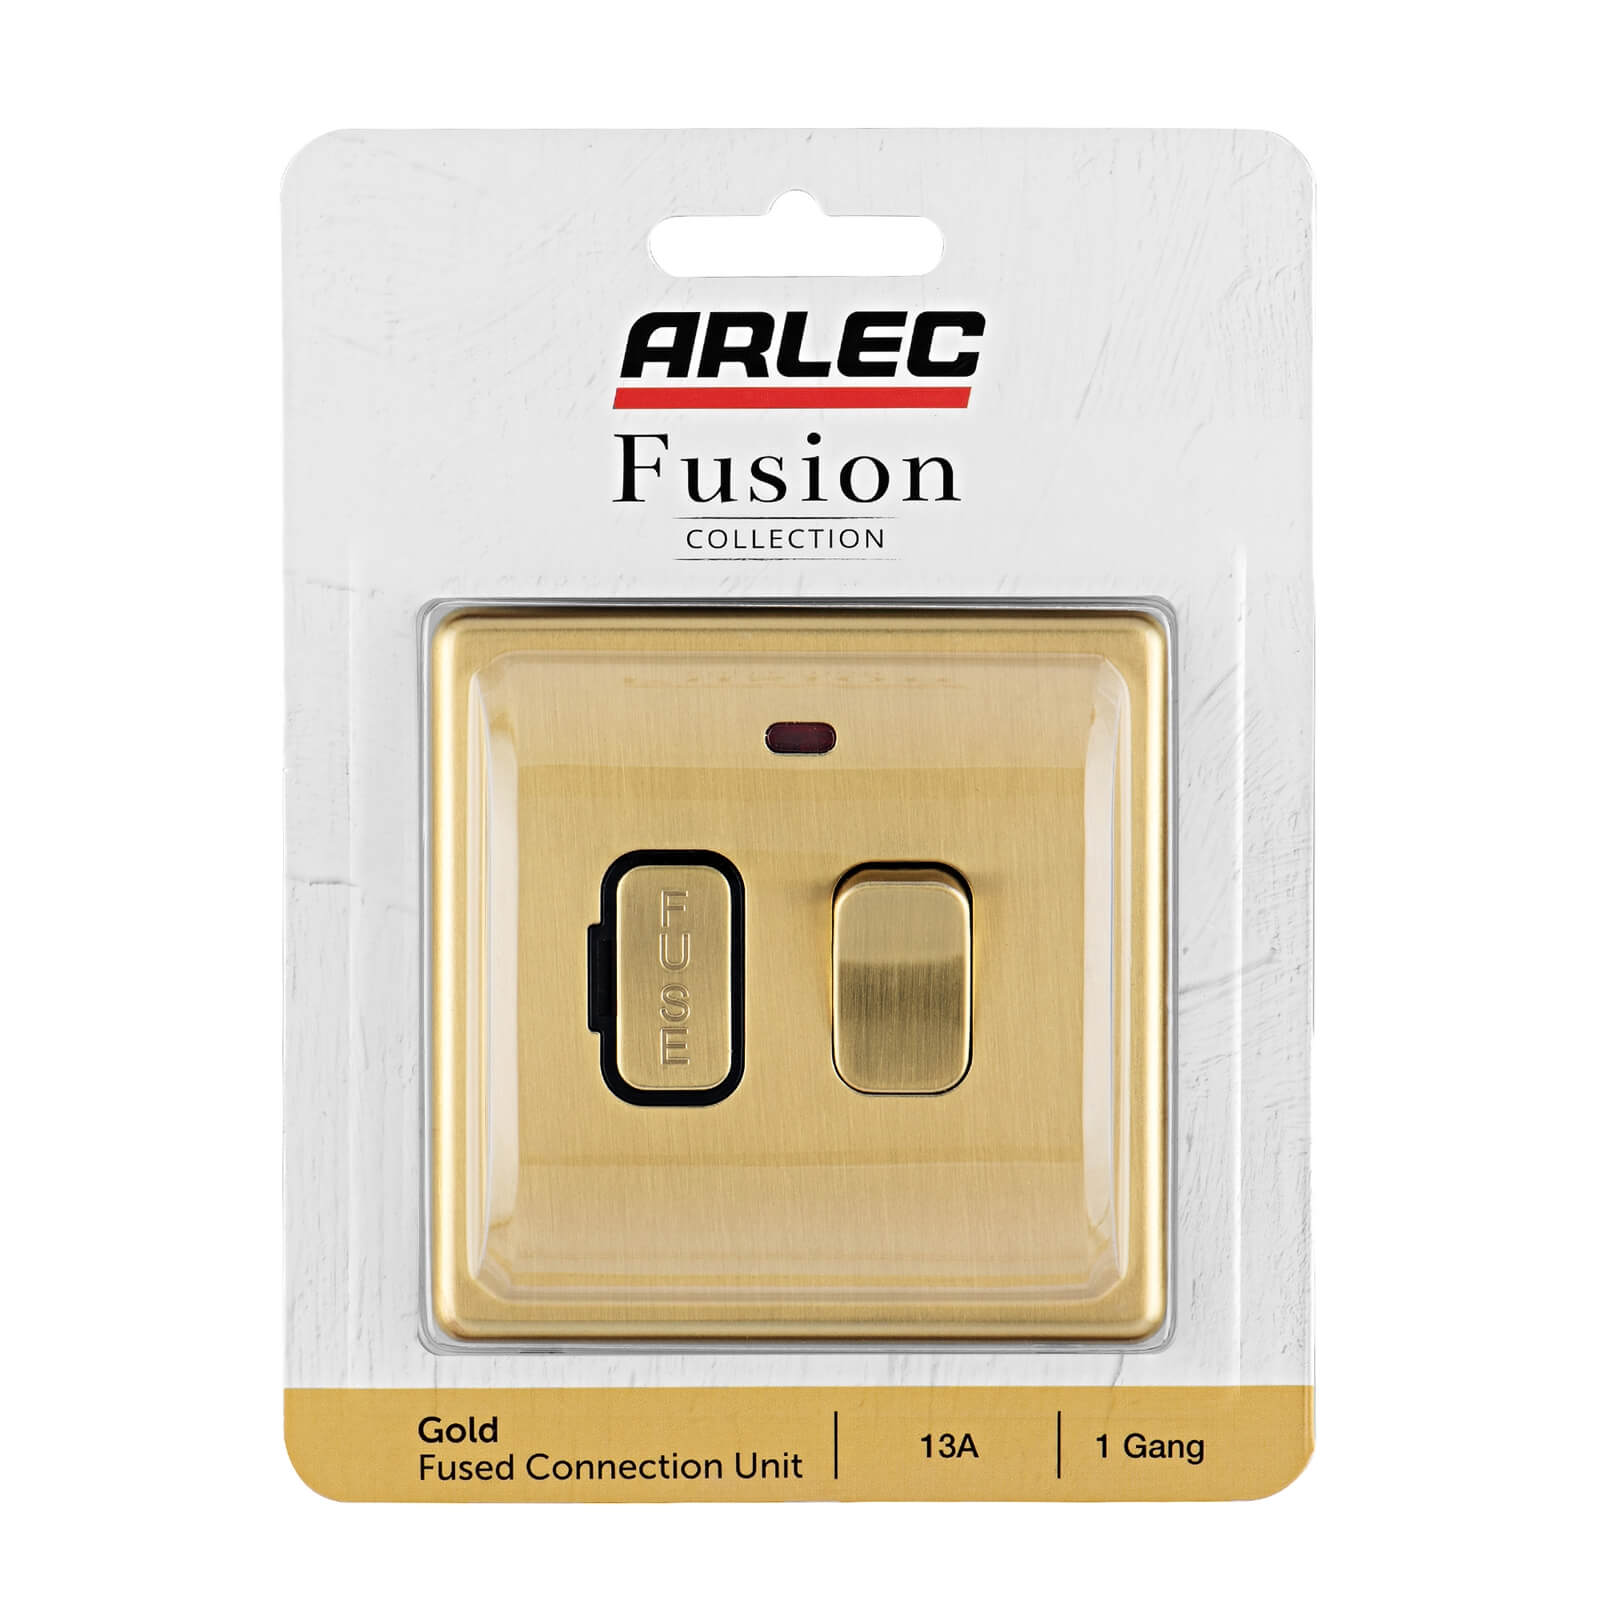 Arlec Fusion 13A Gold Switched fused connection unit